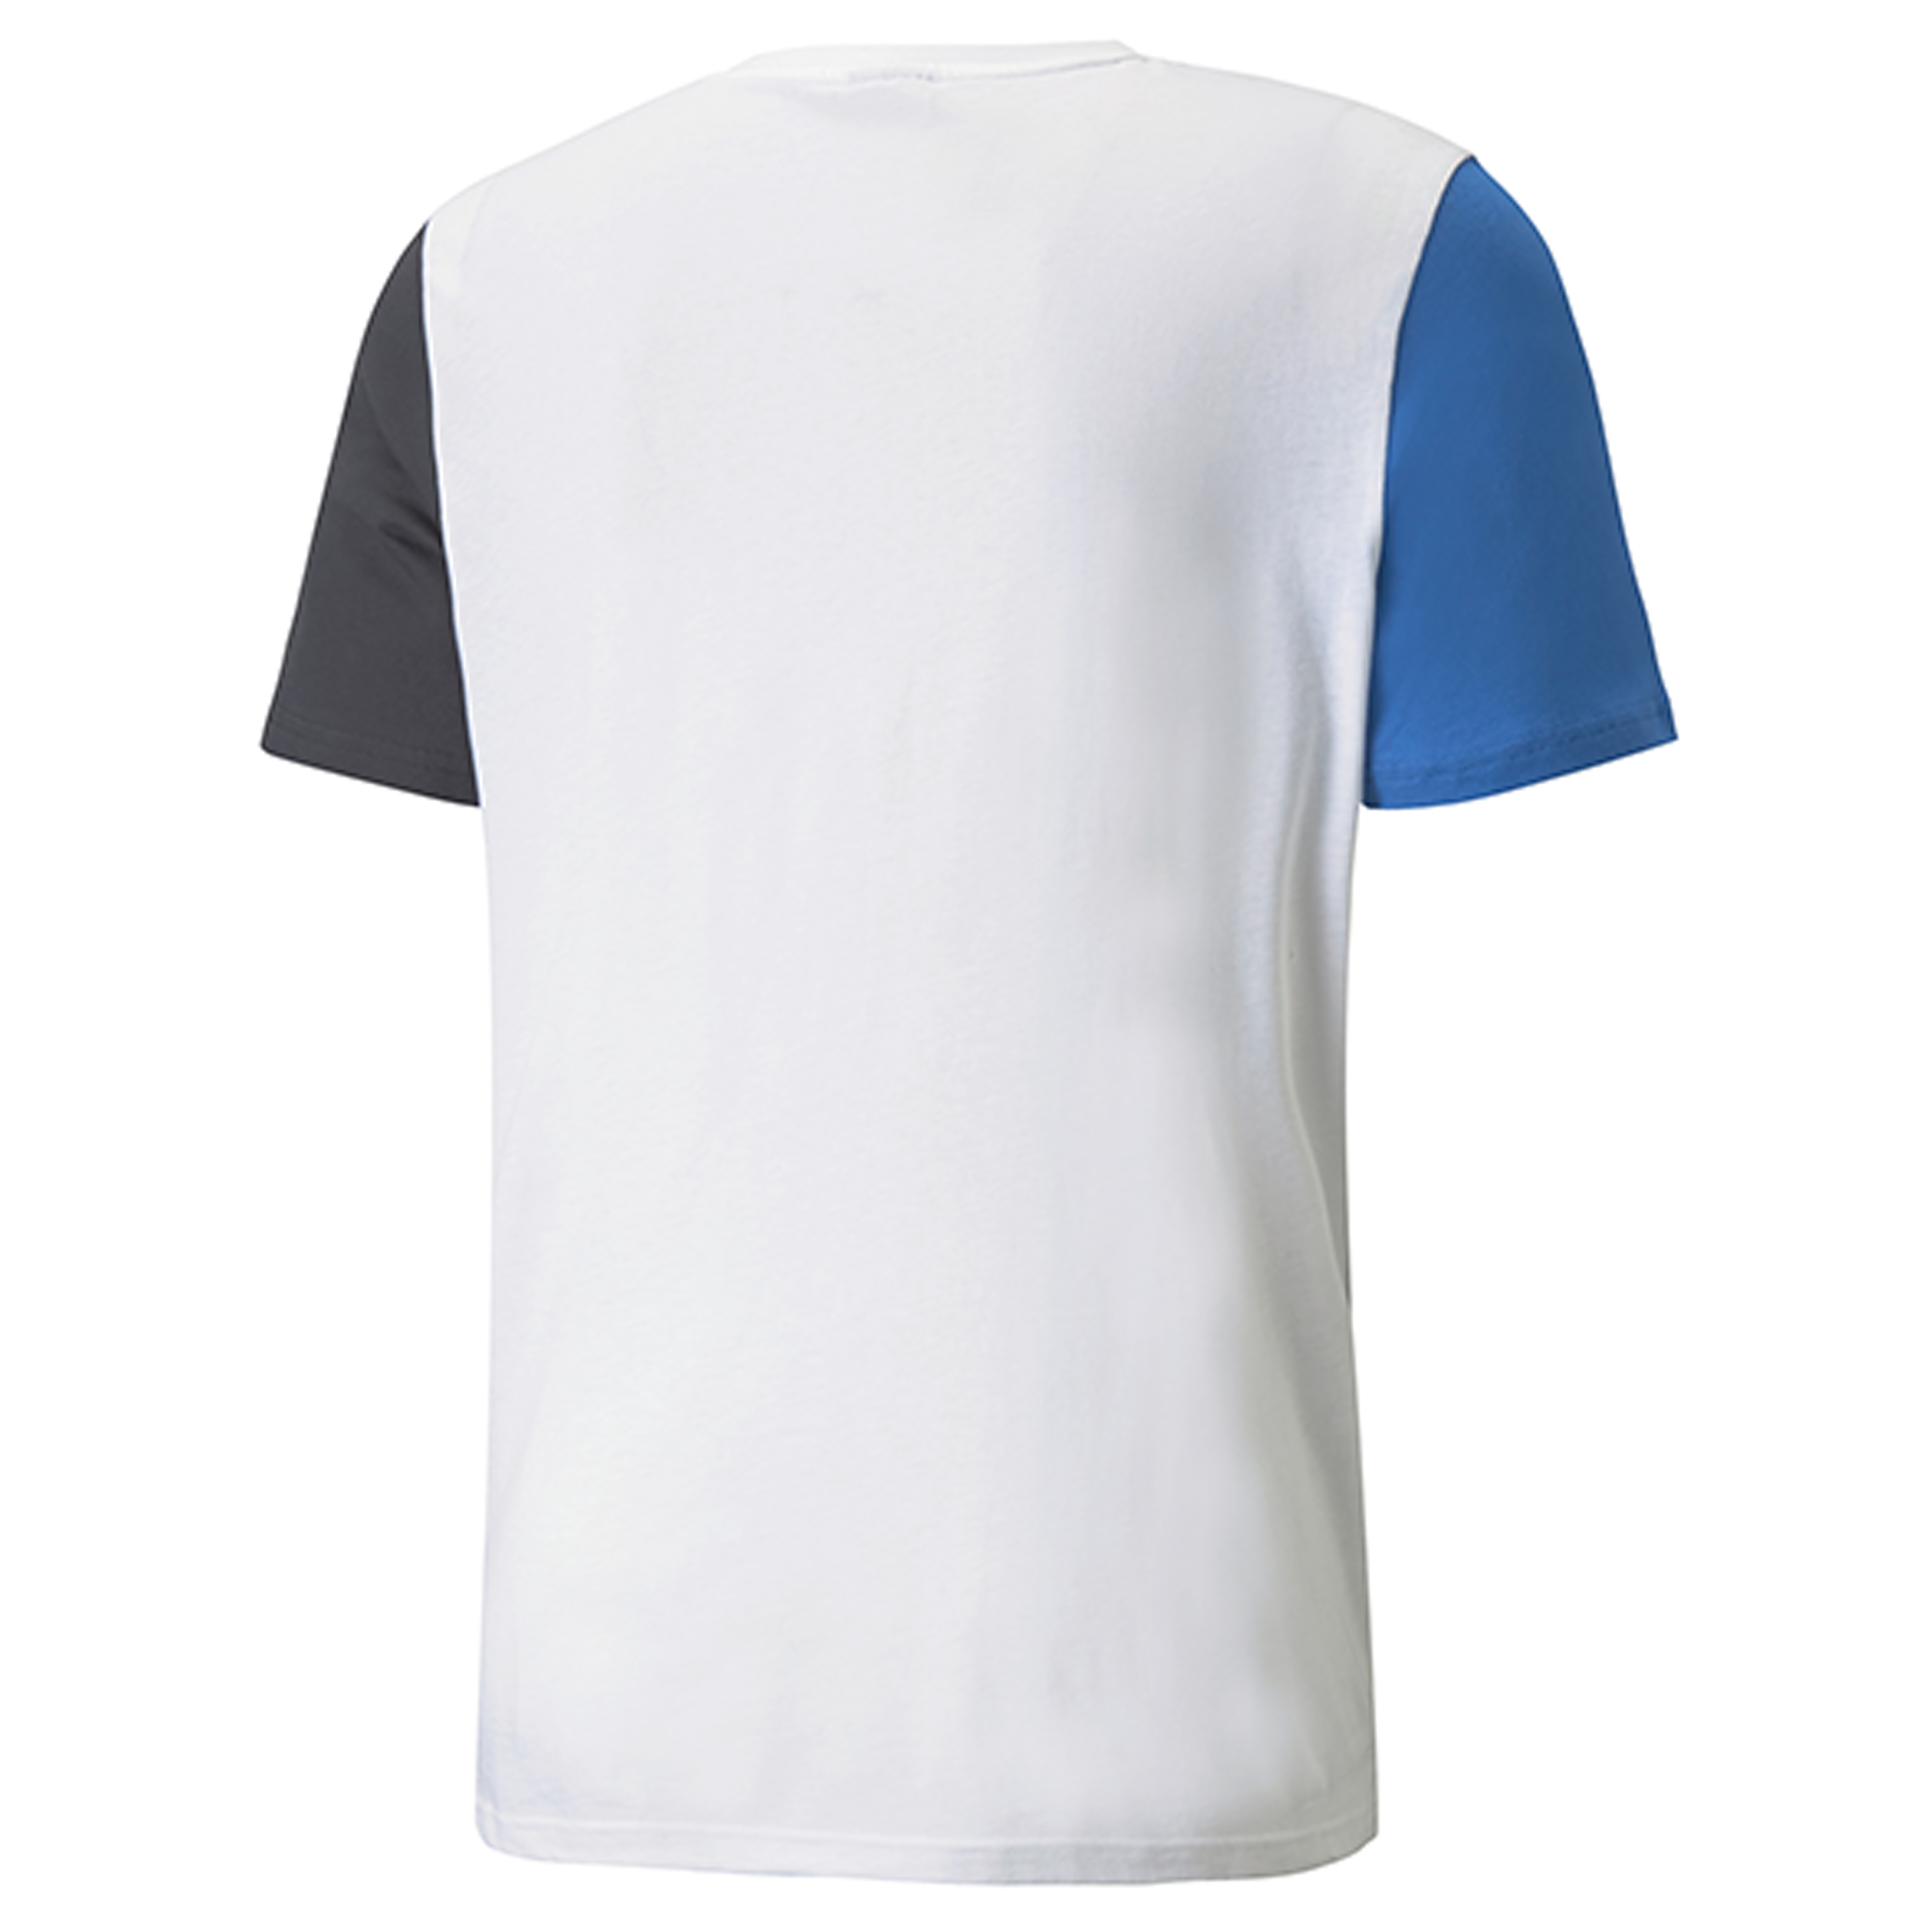 Remera Puma Clsx,  image number null